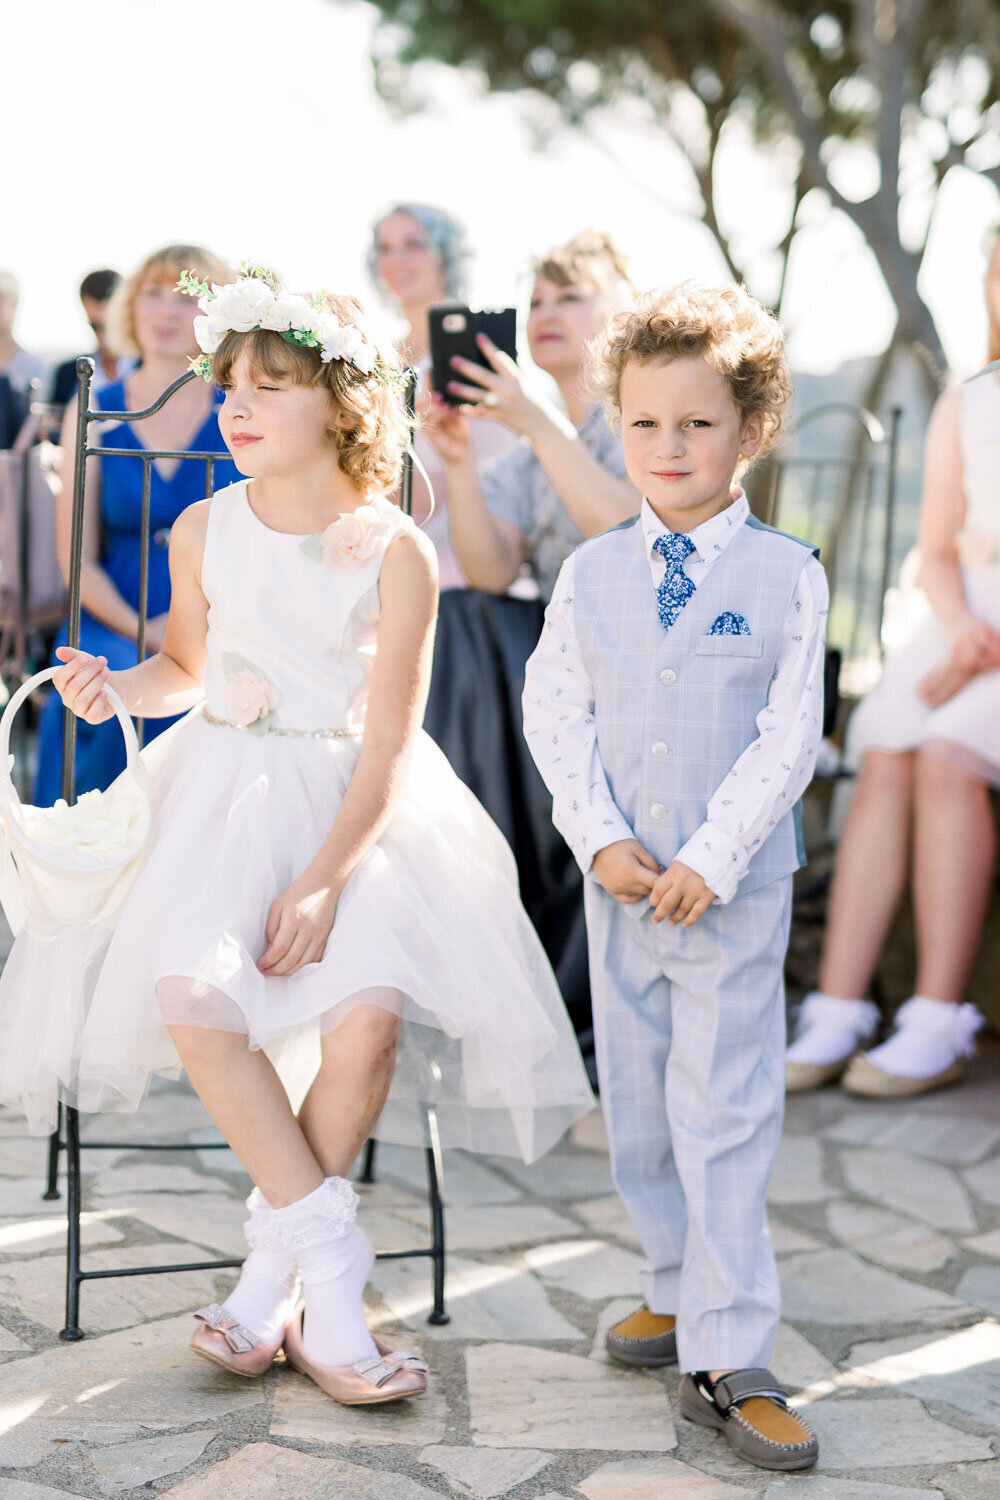 Children at a wedding in tuscany